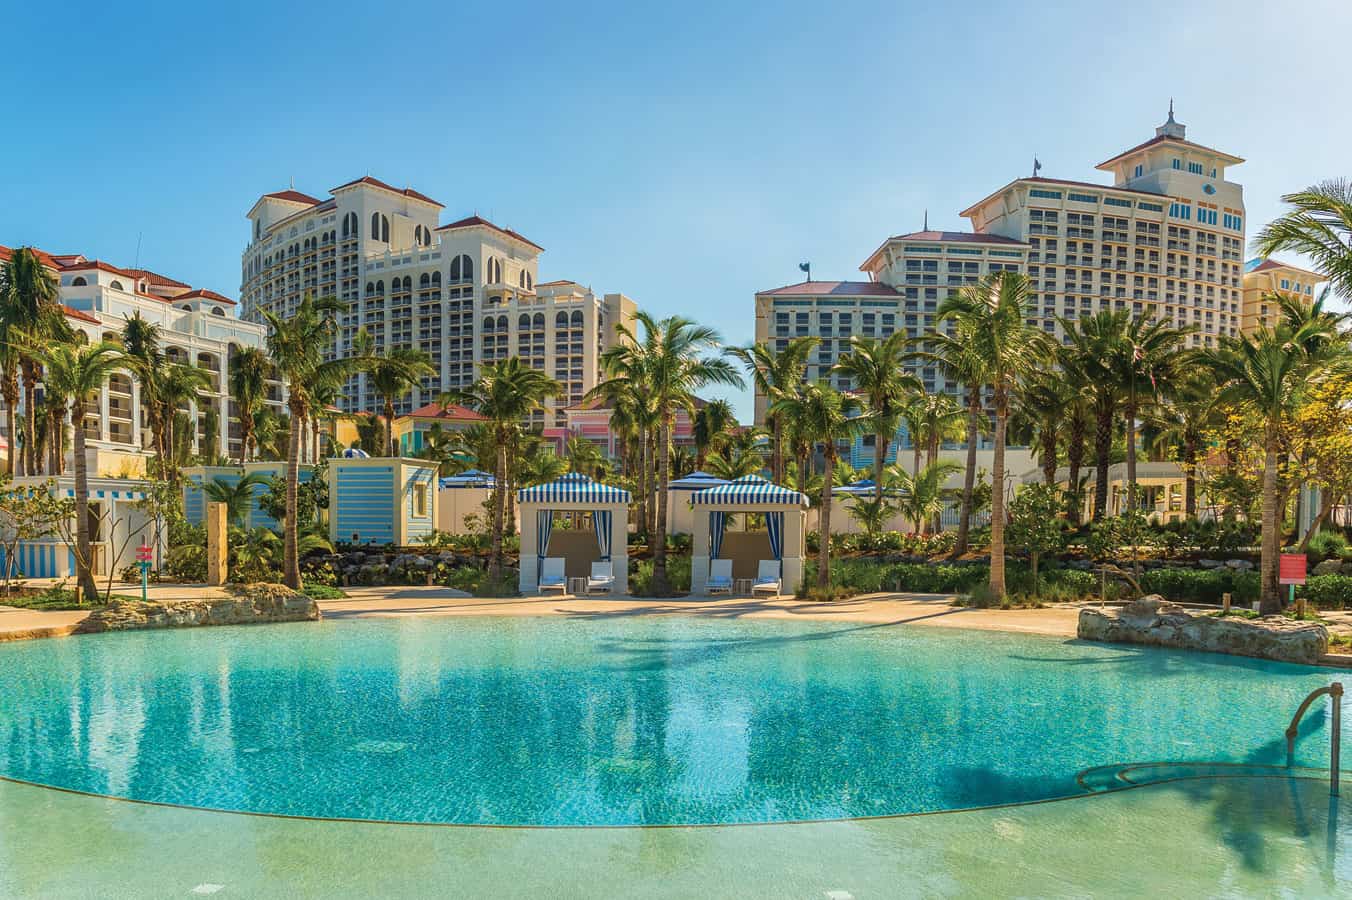 Grand-Hyatt-Baha-Mar-East-West-Towers-view-from-pools